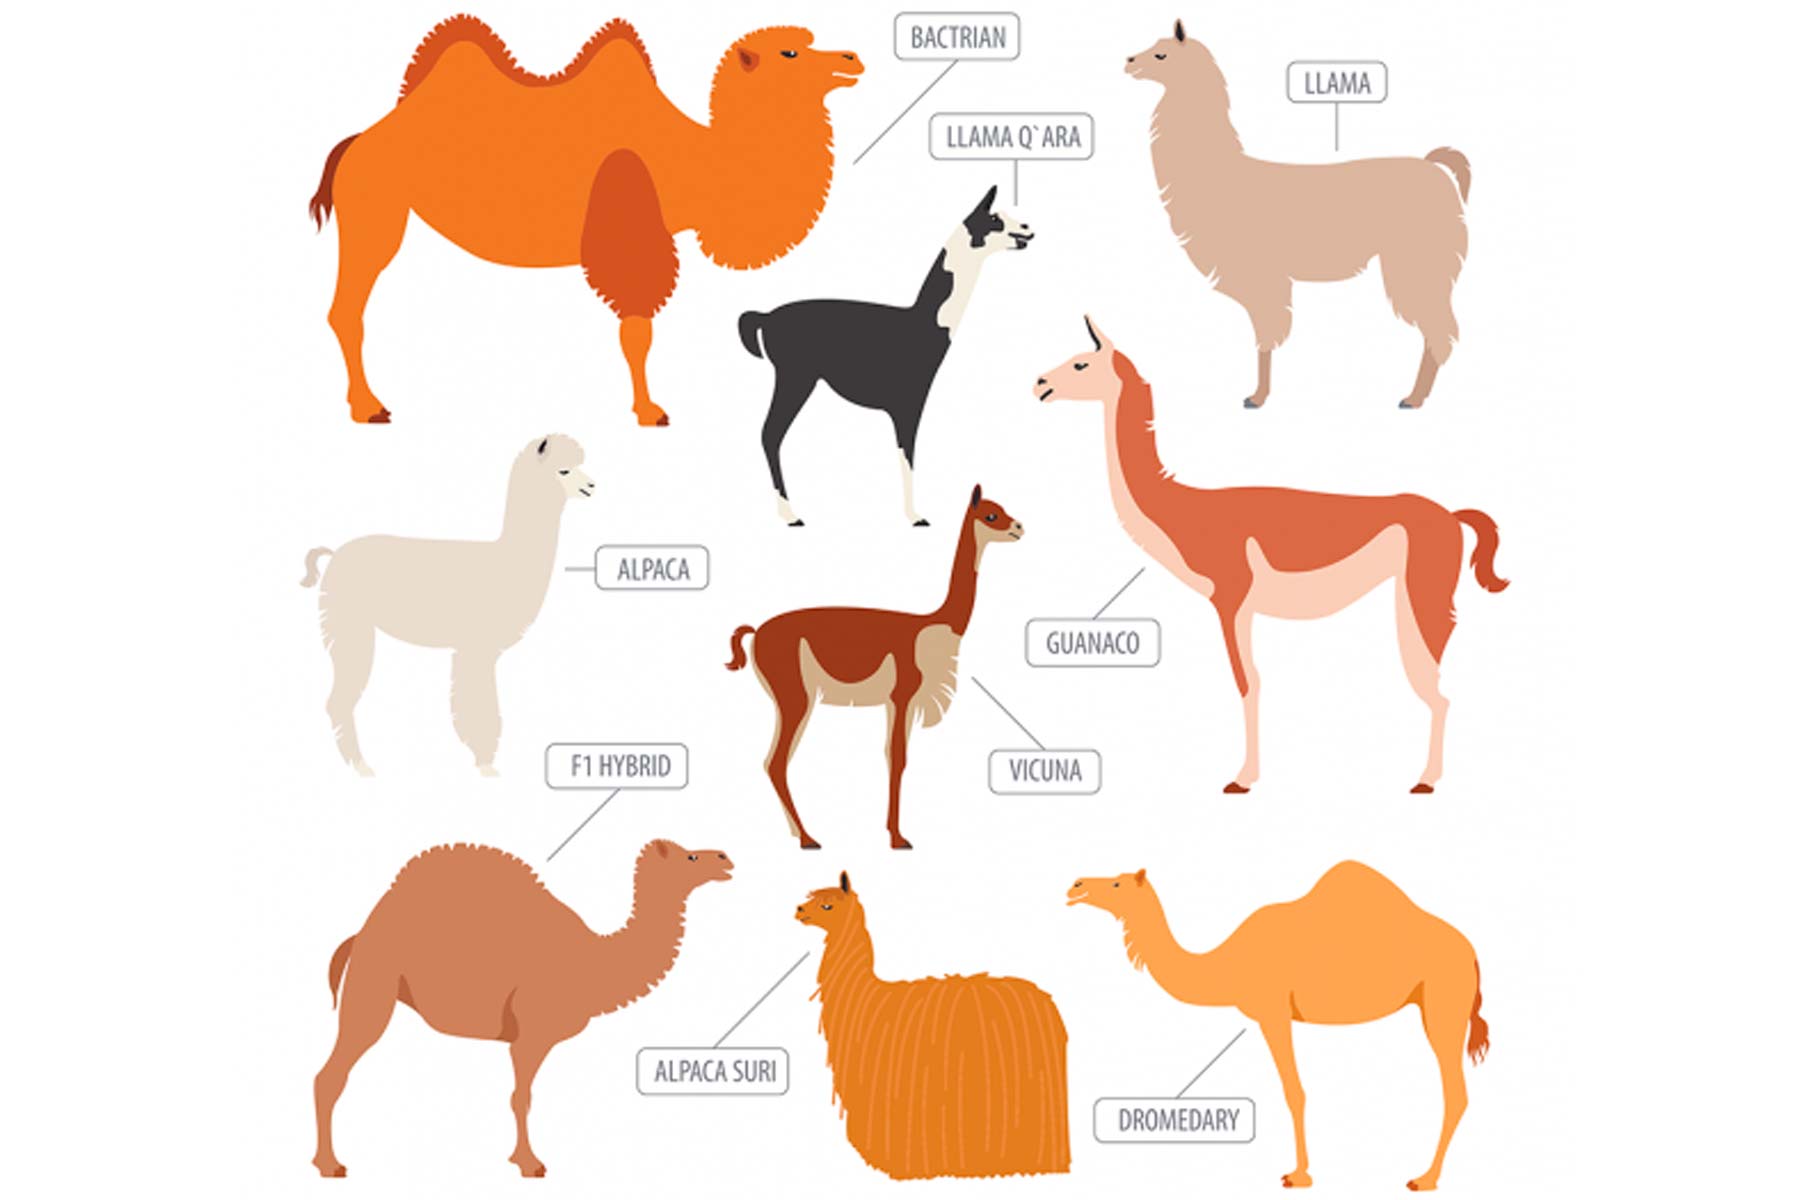 Is there a difference between Llamas and Alpacas? What about Vicuña?